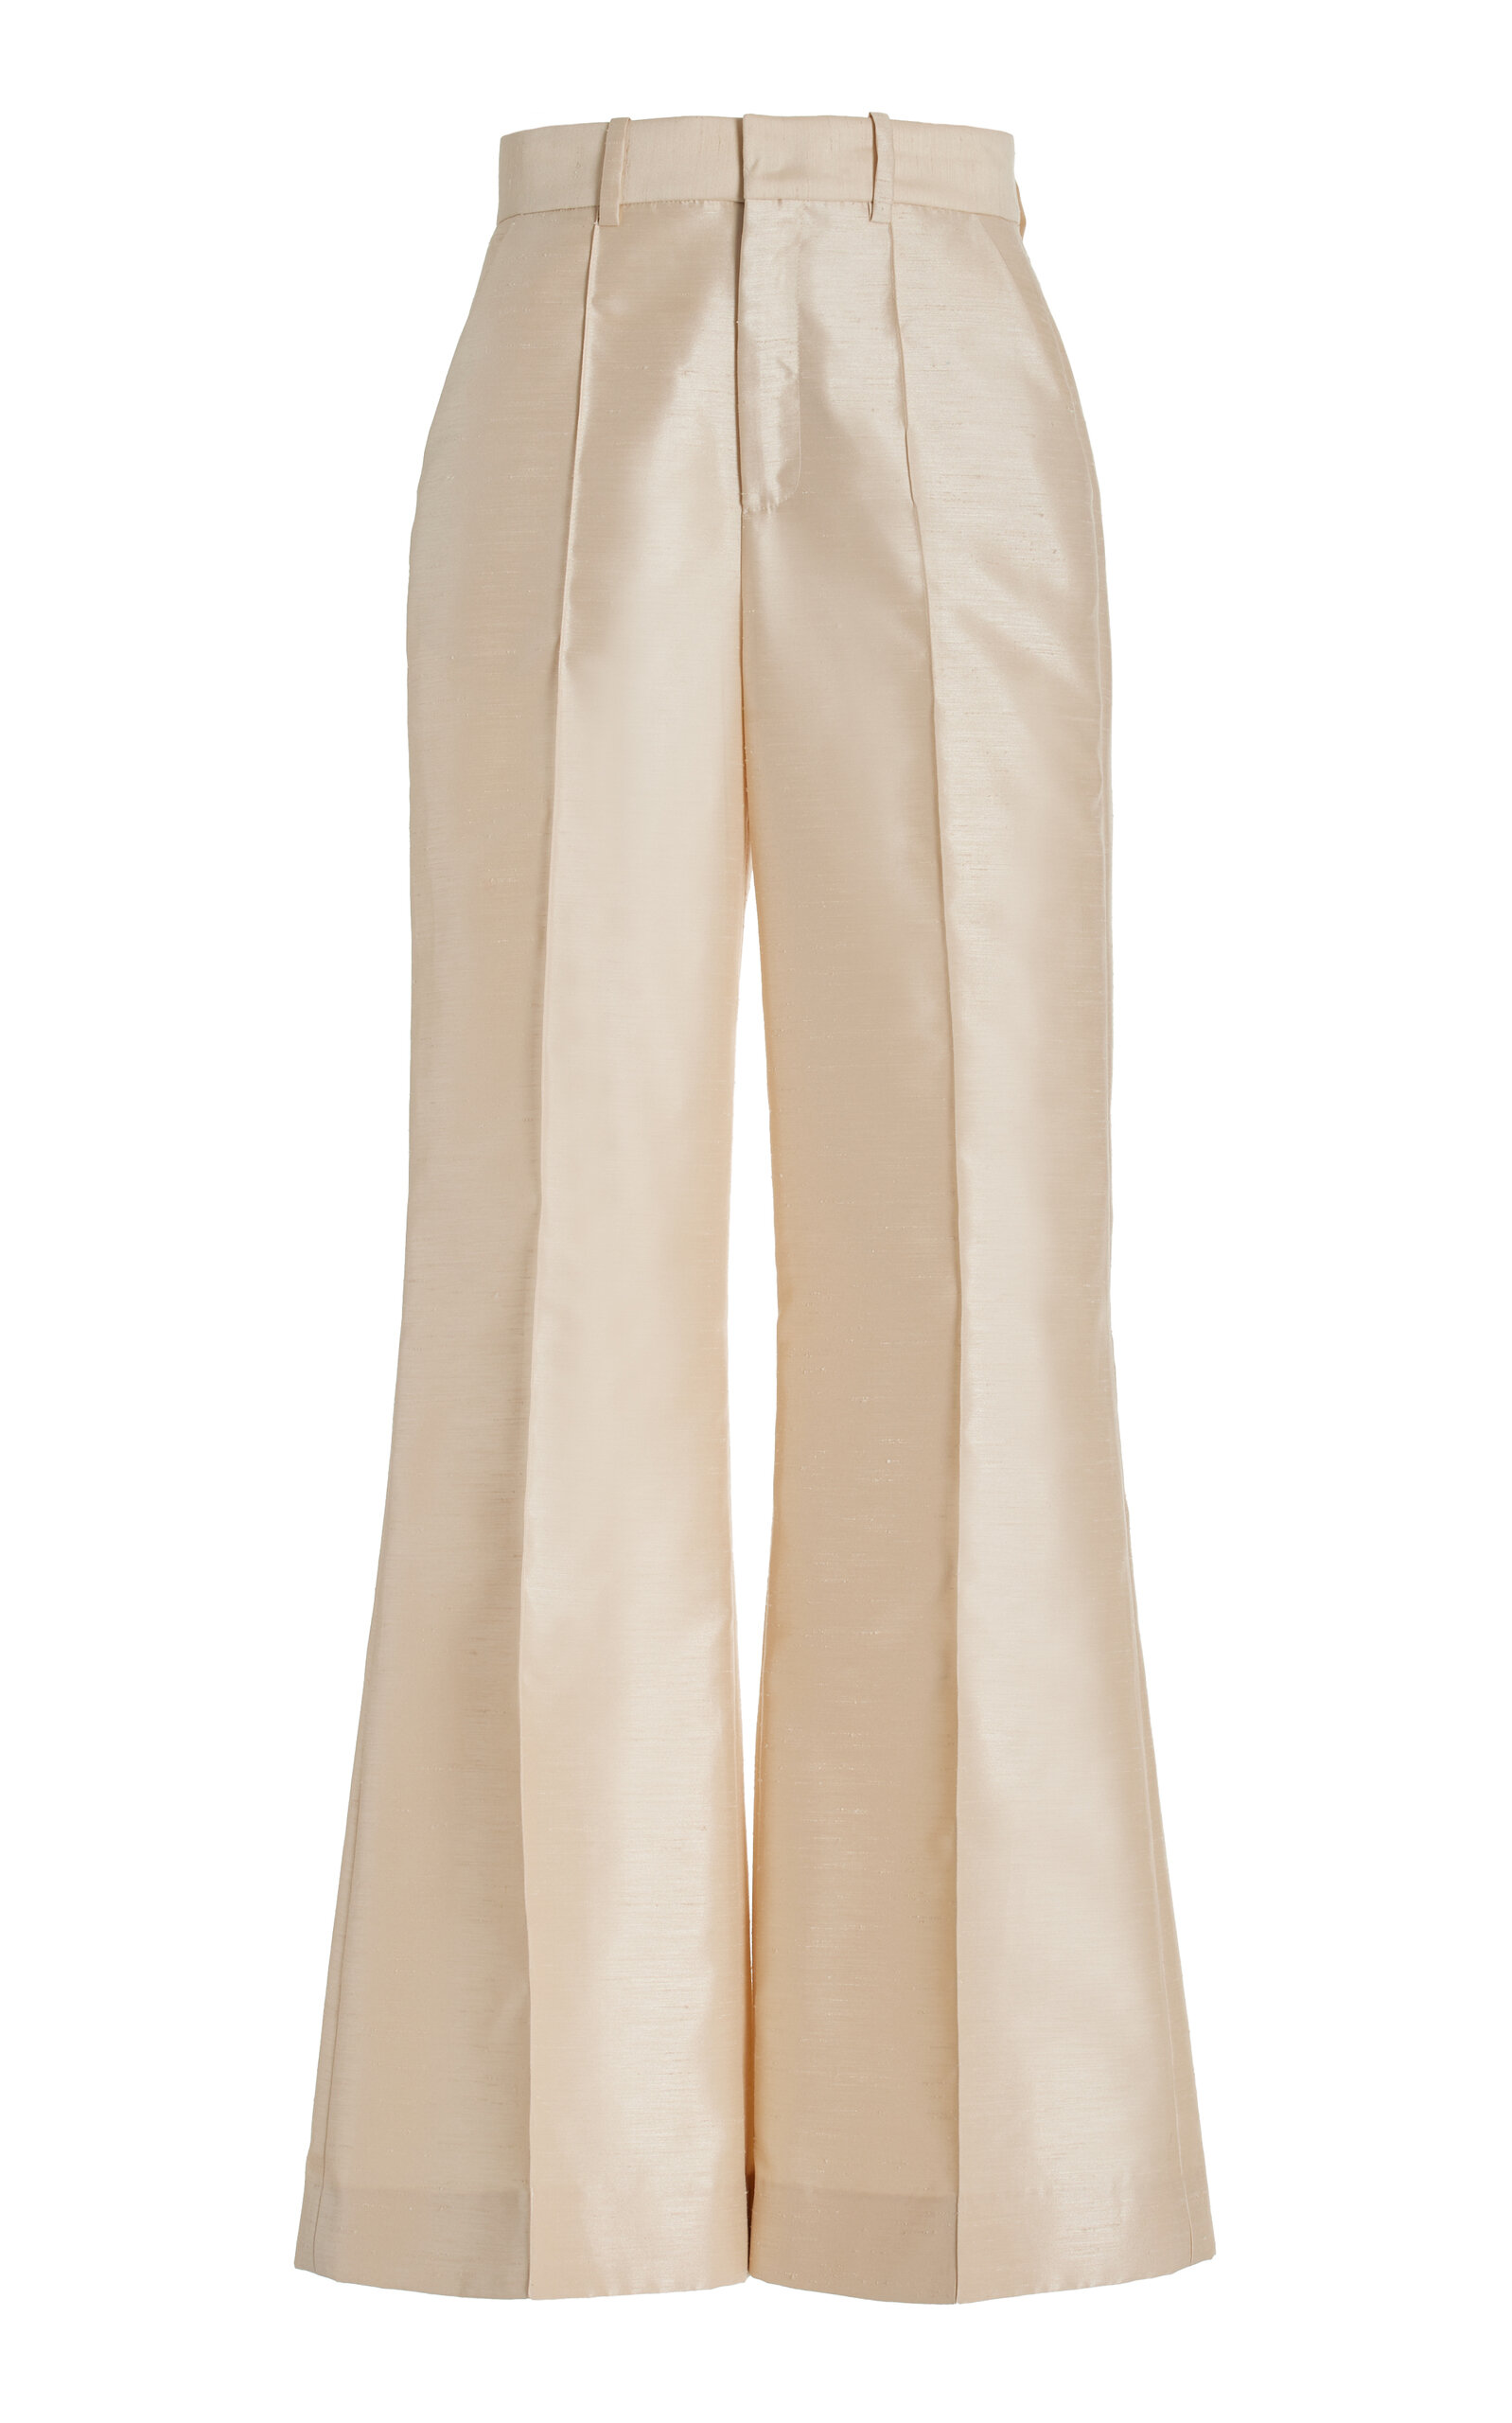 Paneled and Piped Wide-Leg Pants